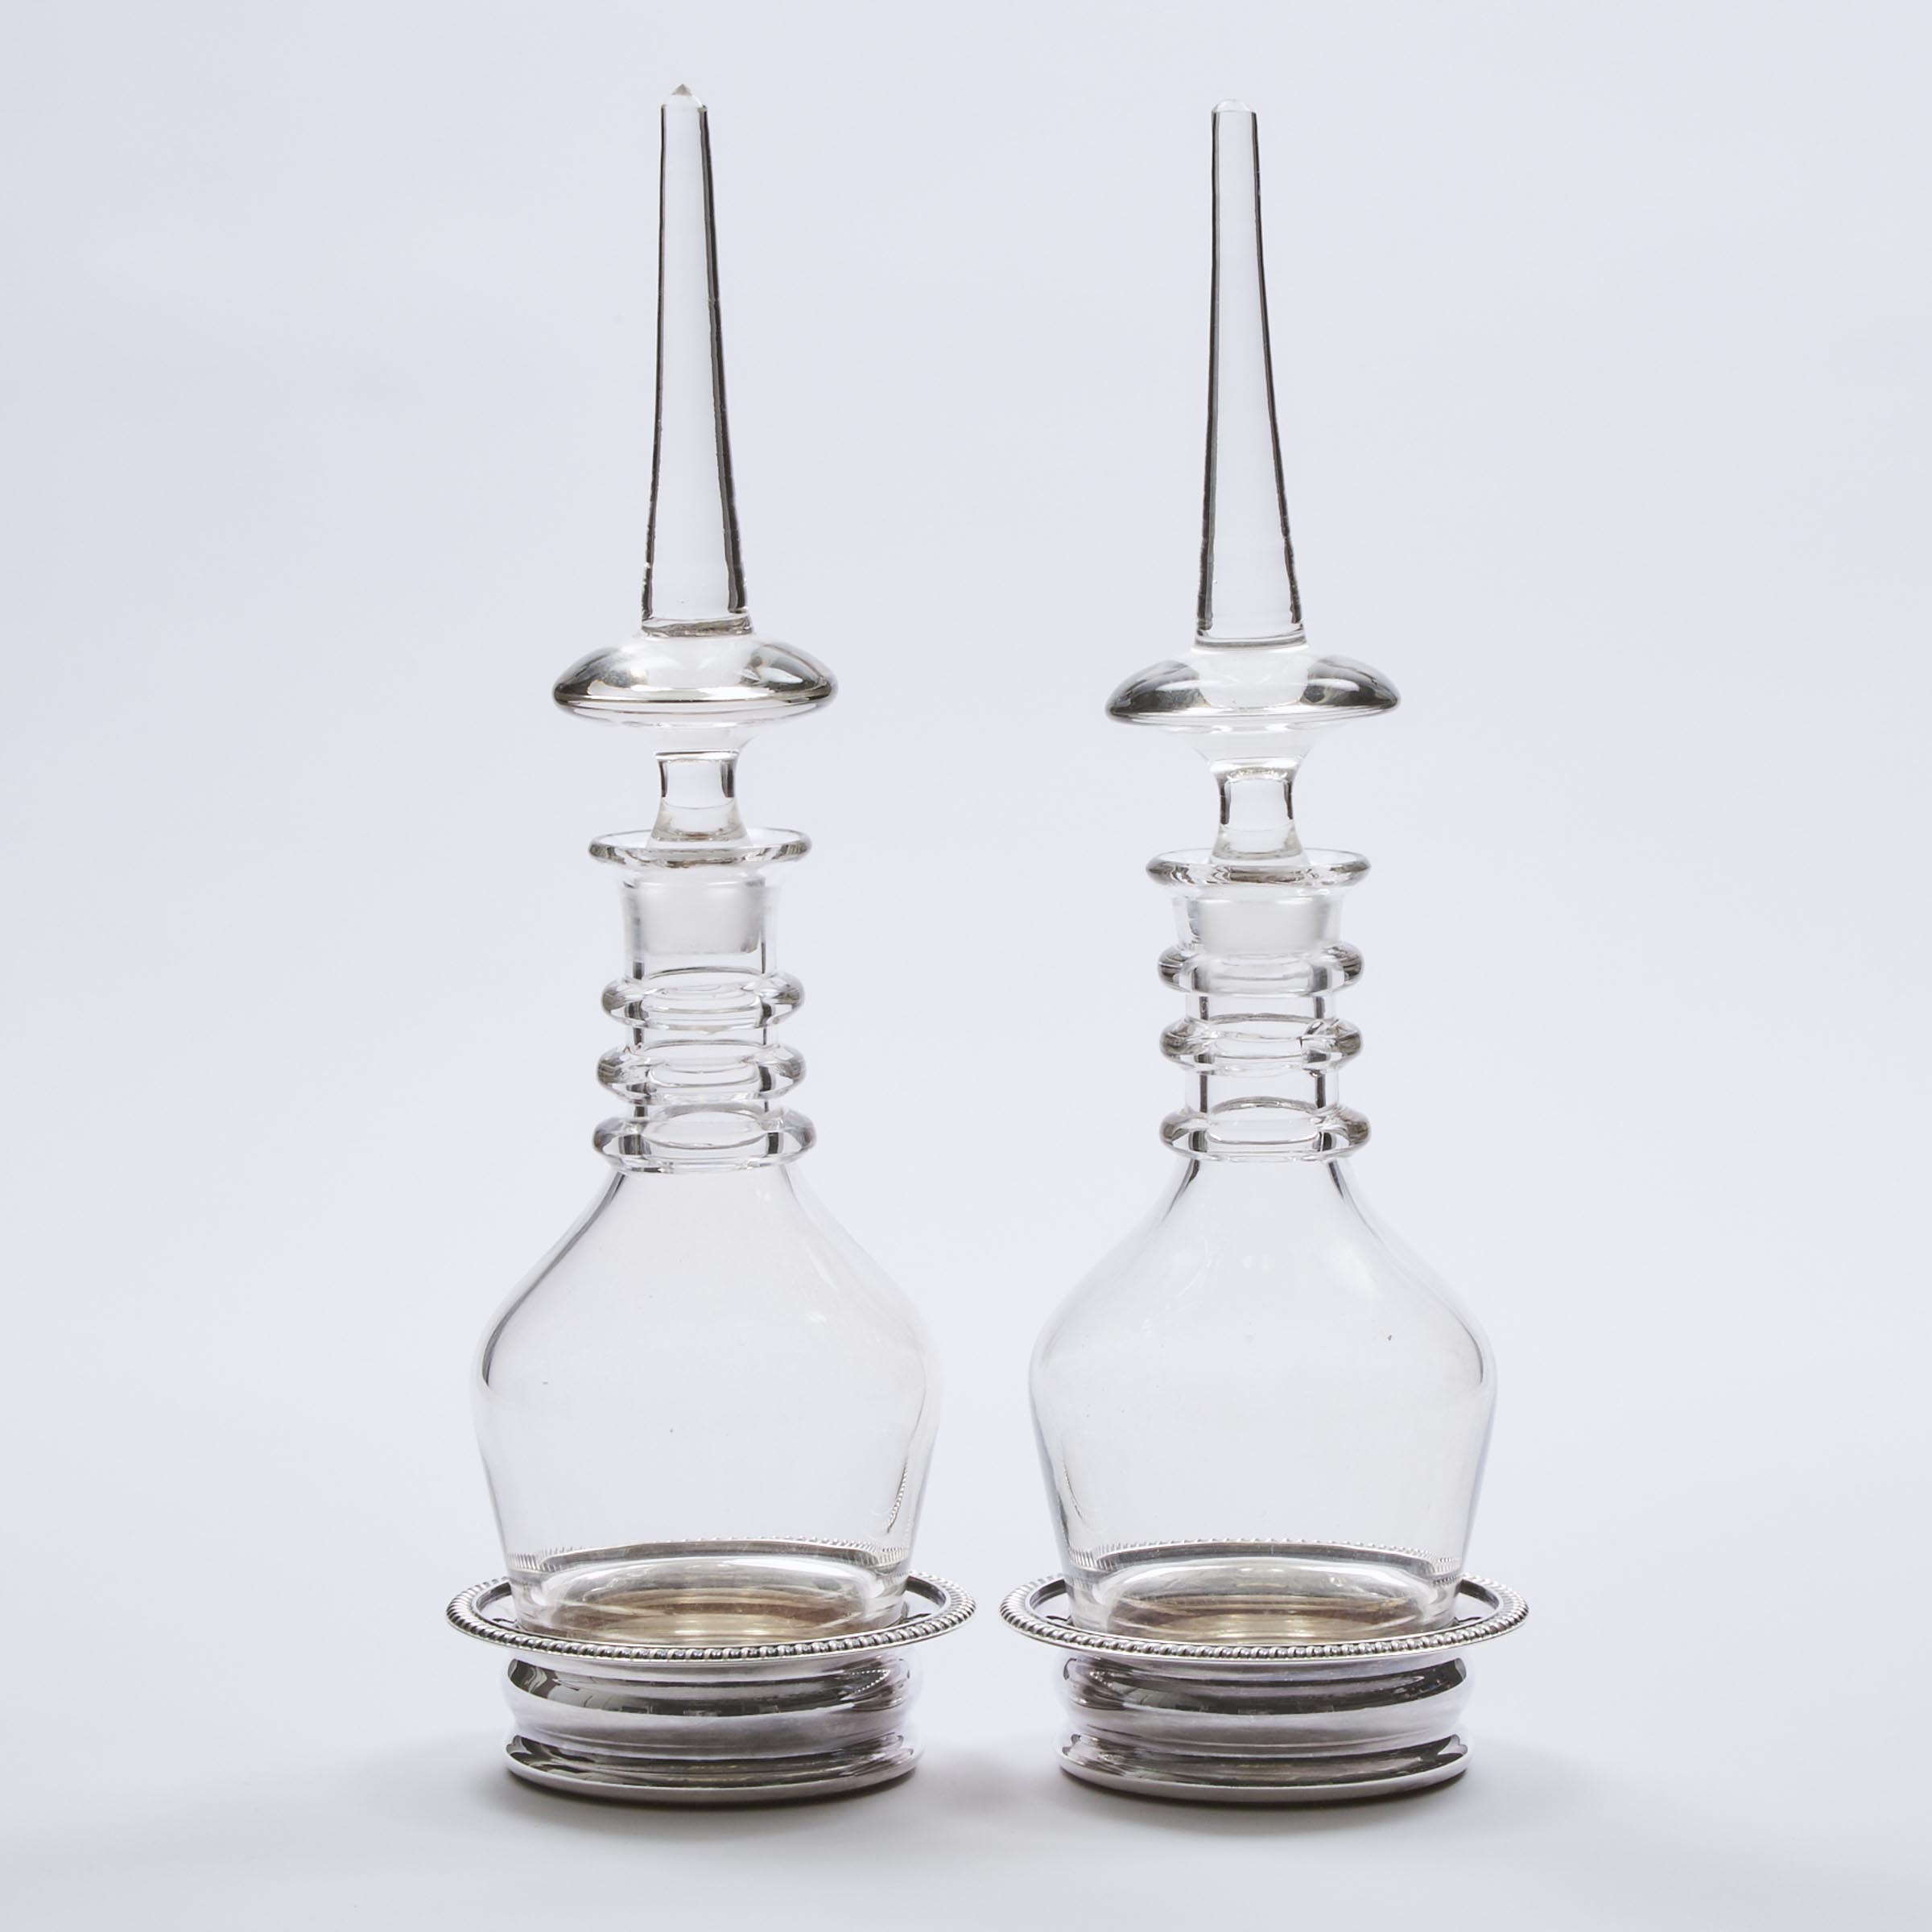 Pair of Victorian Glass Three-Ring Decanters, late 19th century